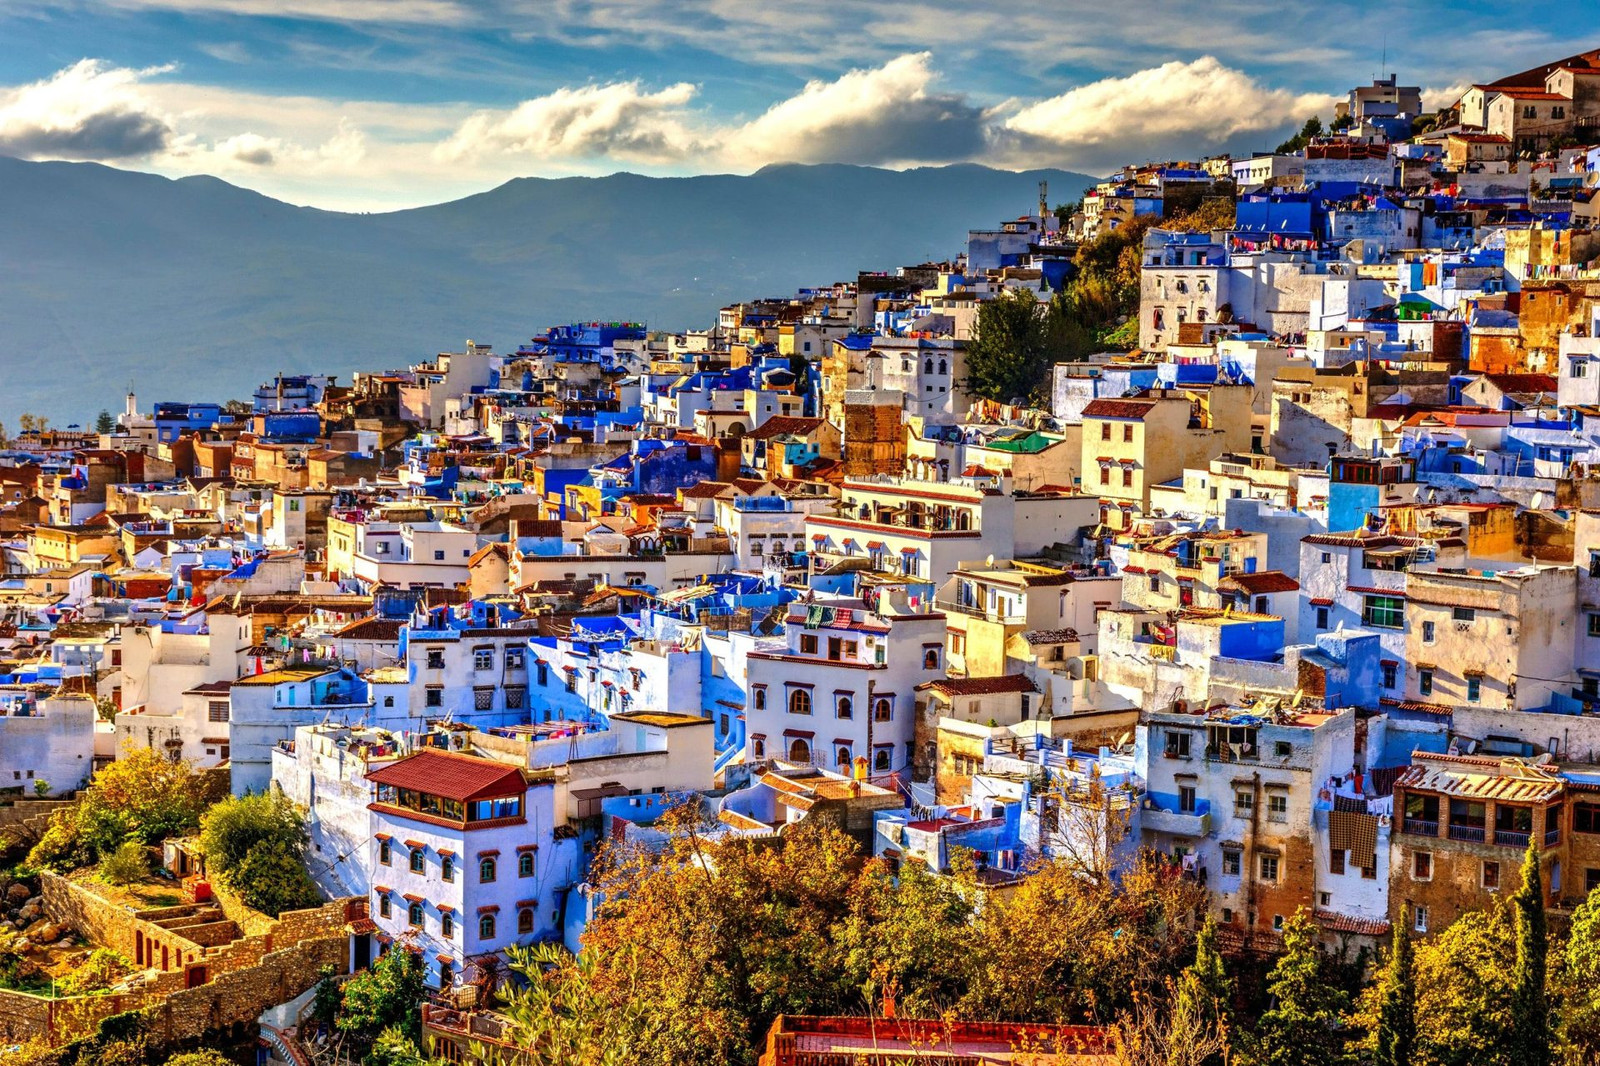 Day 4: Free morning in Chefchaouen then Drive to Fes